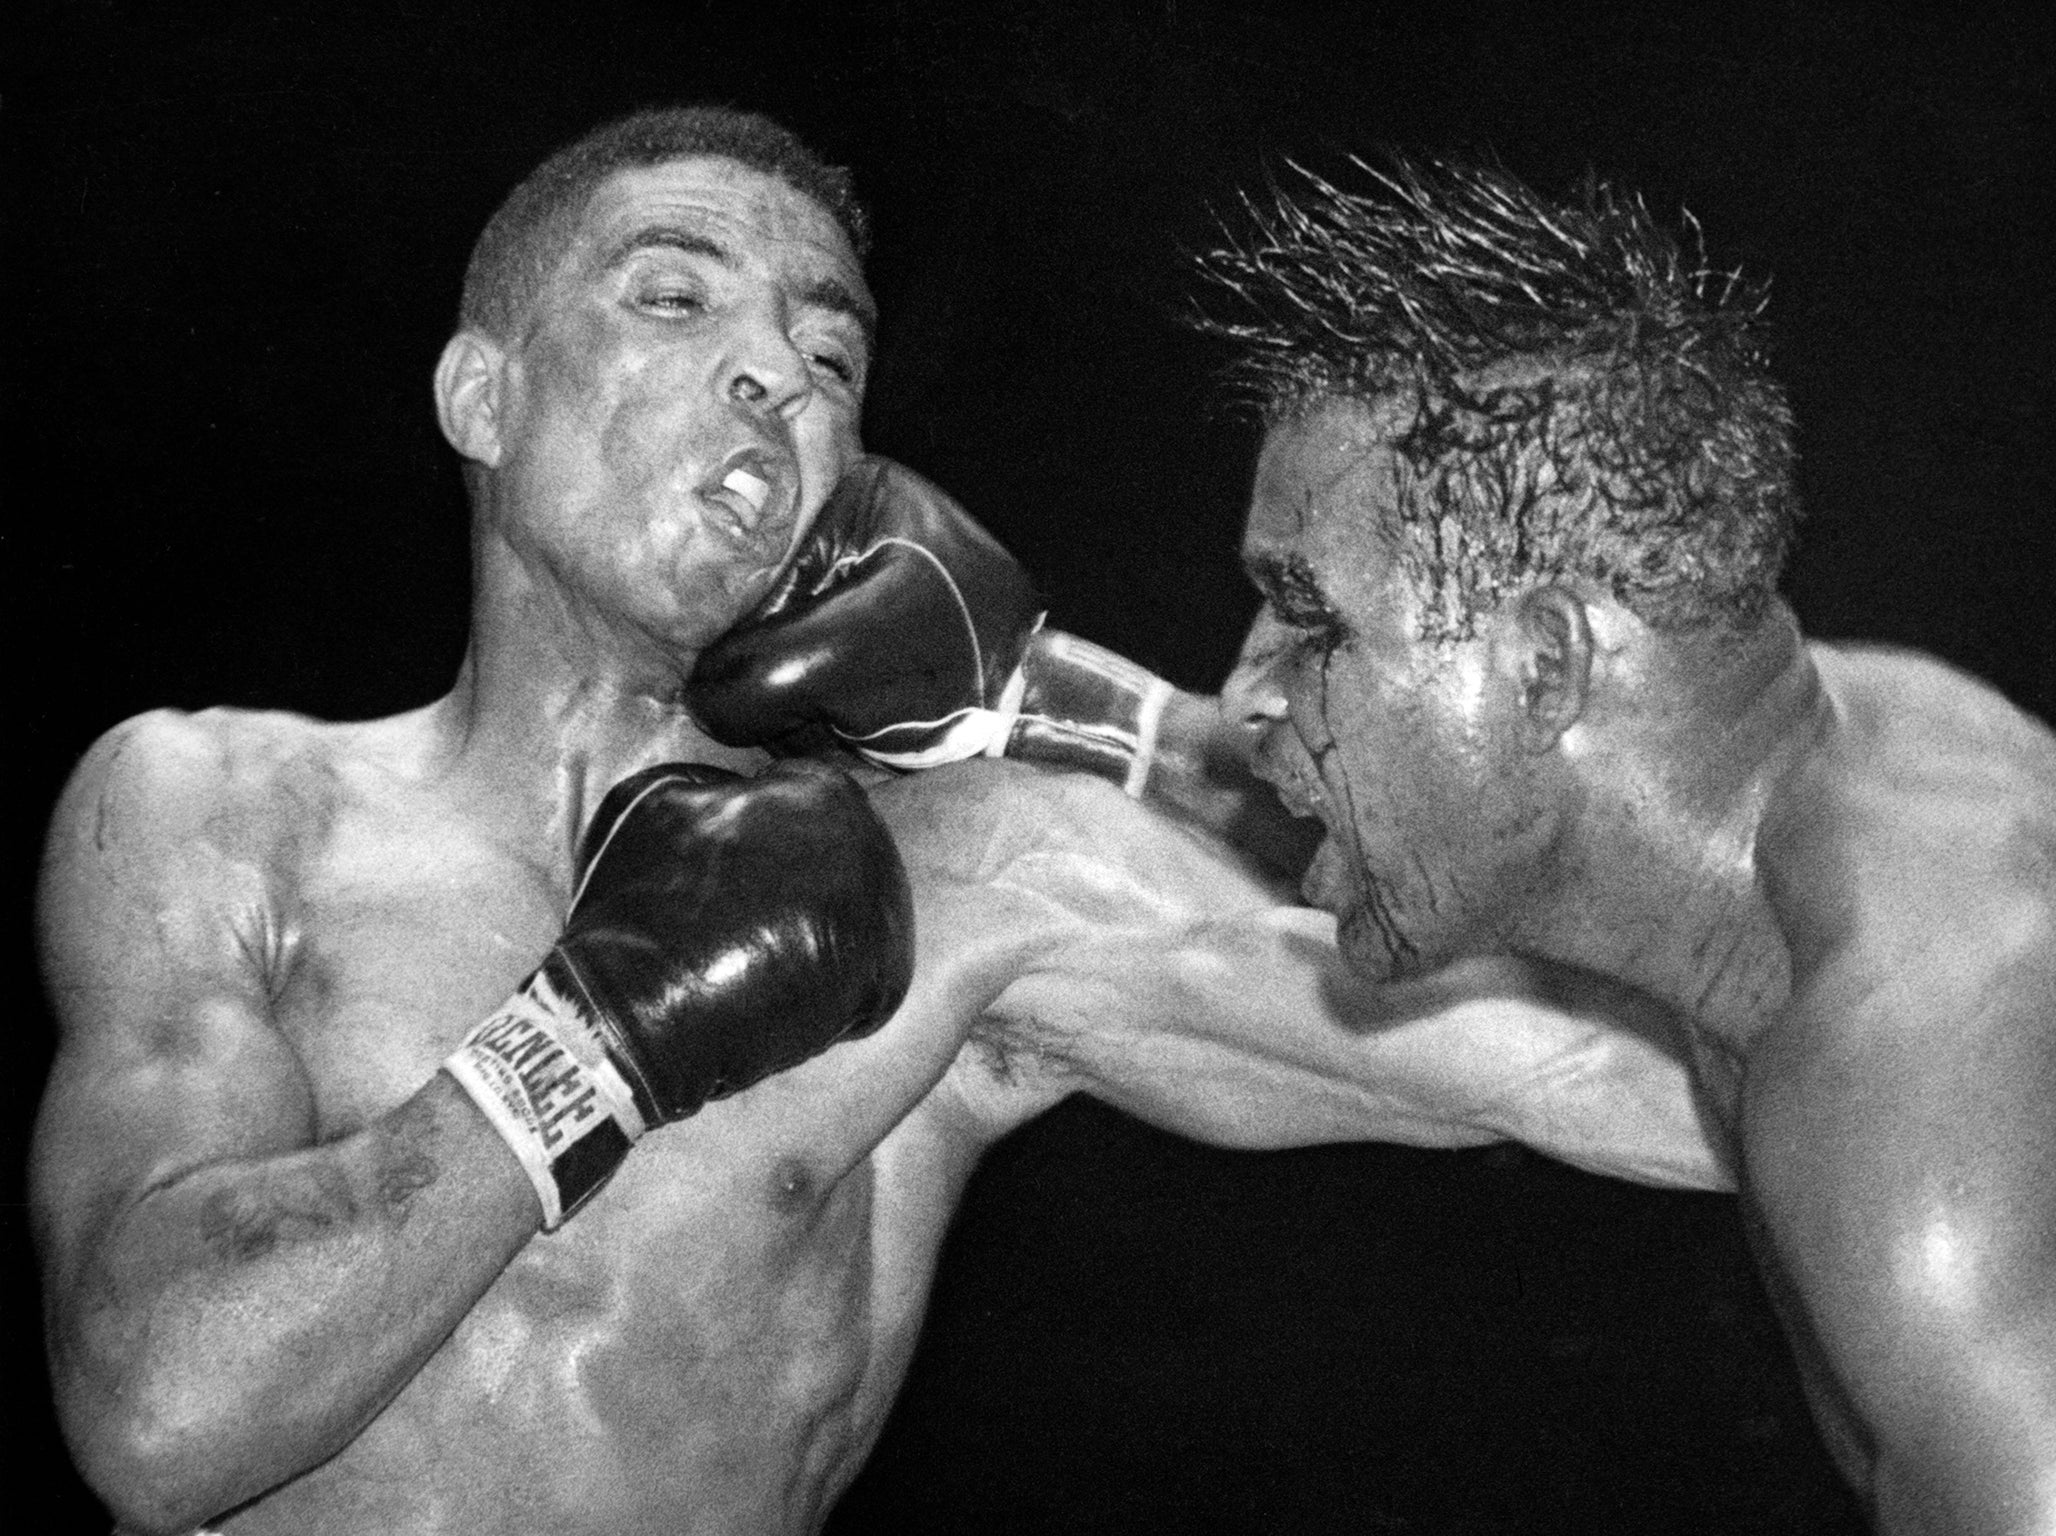 Sugar Ray Robinson throws a hard right to the jaw of Randolph Turpin